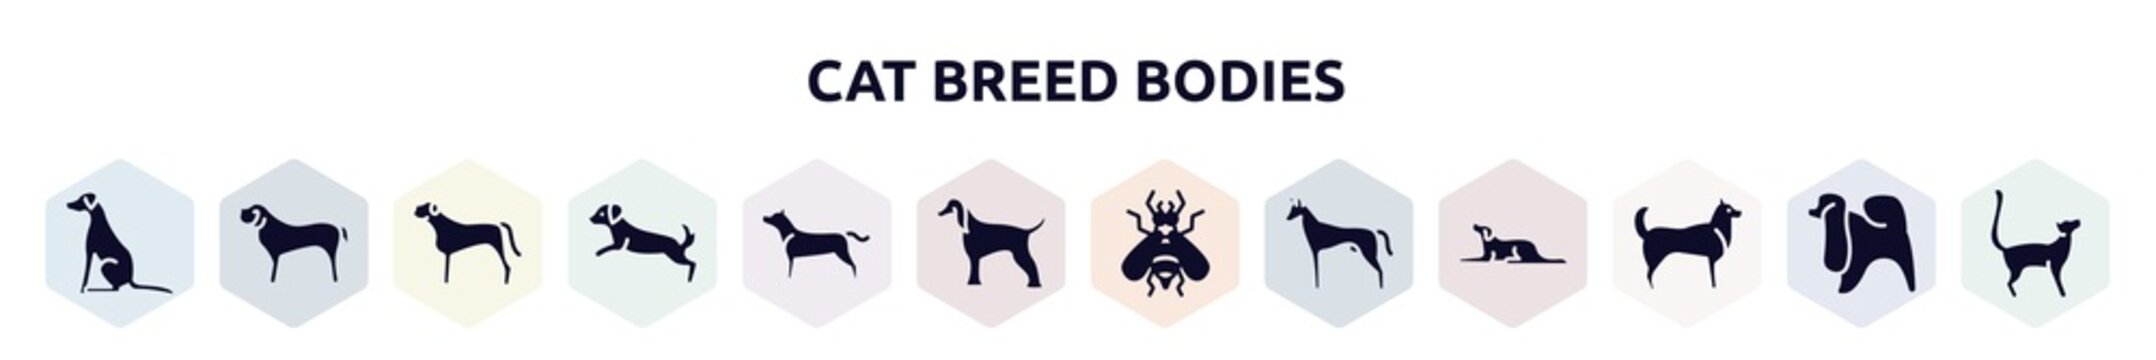 cat breed bodies filled icons set. glyph icons such as pointer dog, english mastiff, bullmastiff, dog scaping, american staffordshire terrier, afghan hound, hoverfly, pharaoh hound, husky